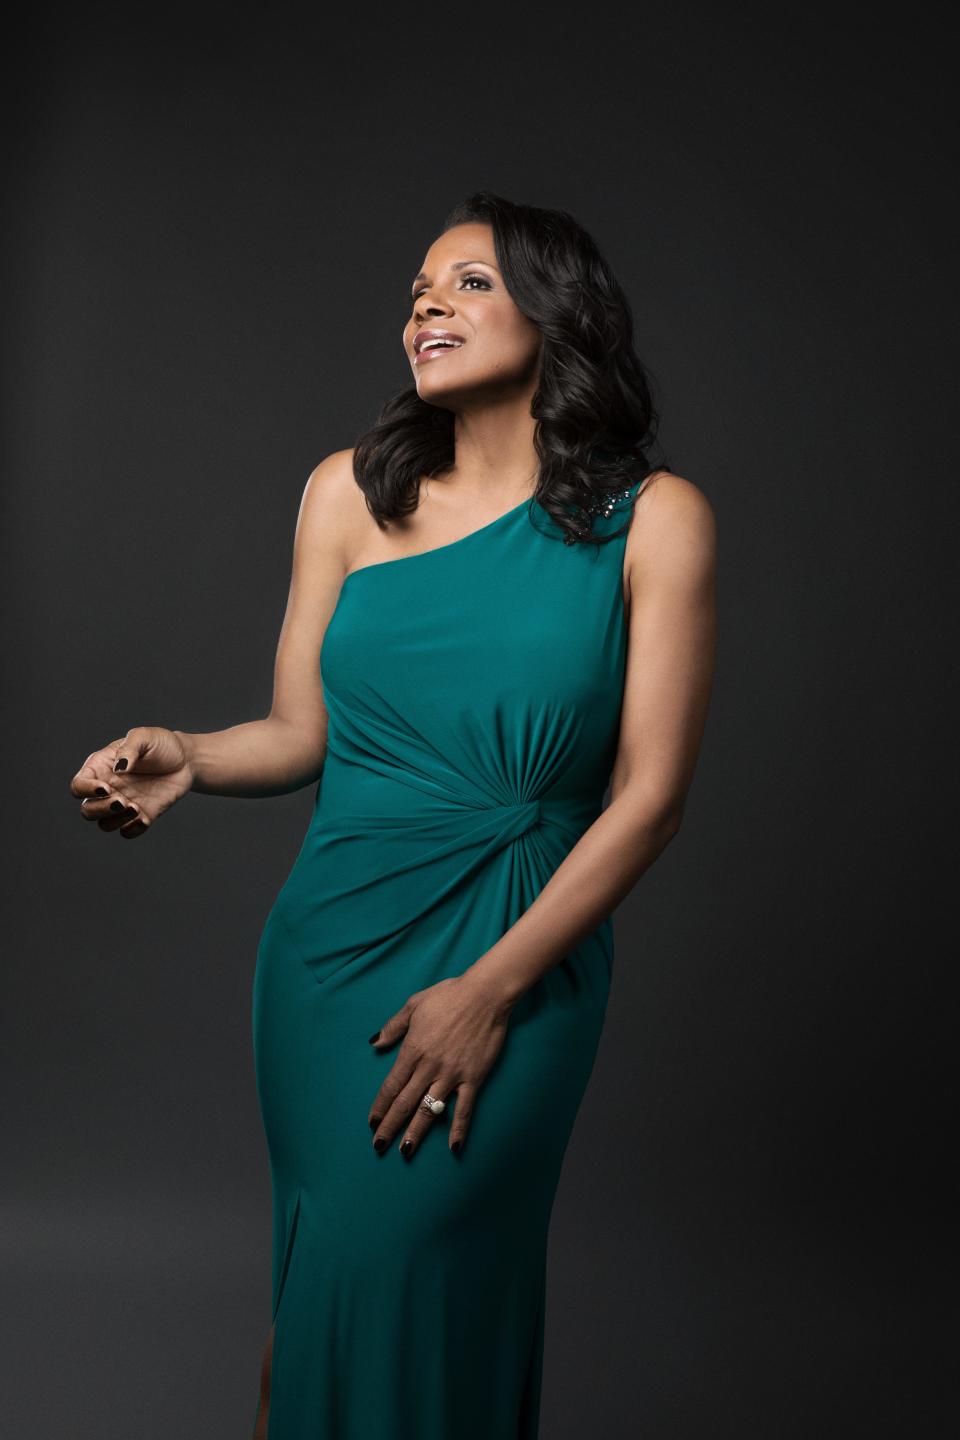 In 2015, actor/singer Audra McDonald was named one of Time magazine’s 100 most influential people and received the National Medal of Arts — America’s highest honor for achievement in the field — from President Barack Obama.